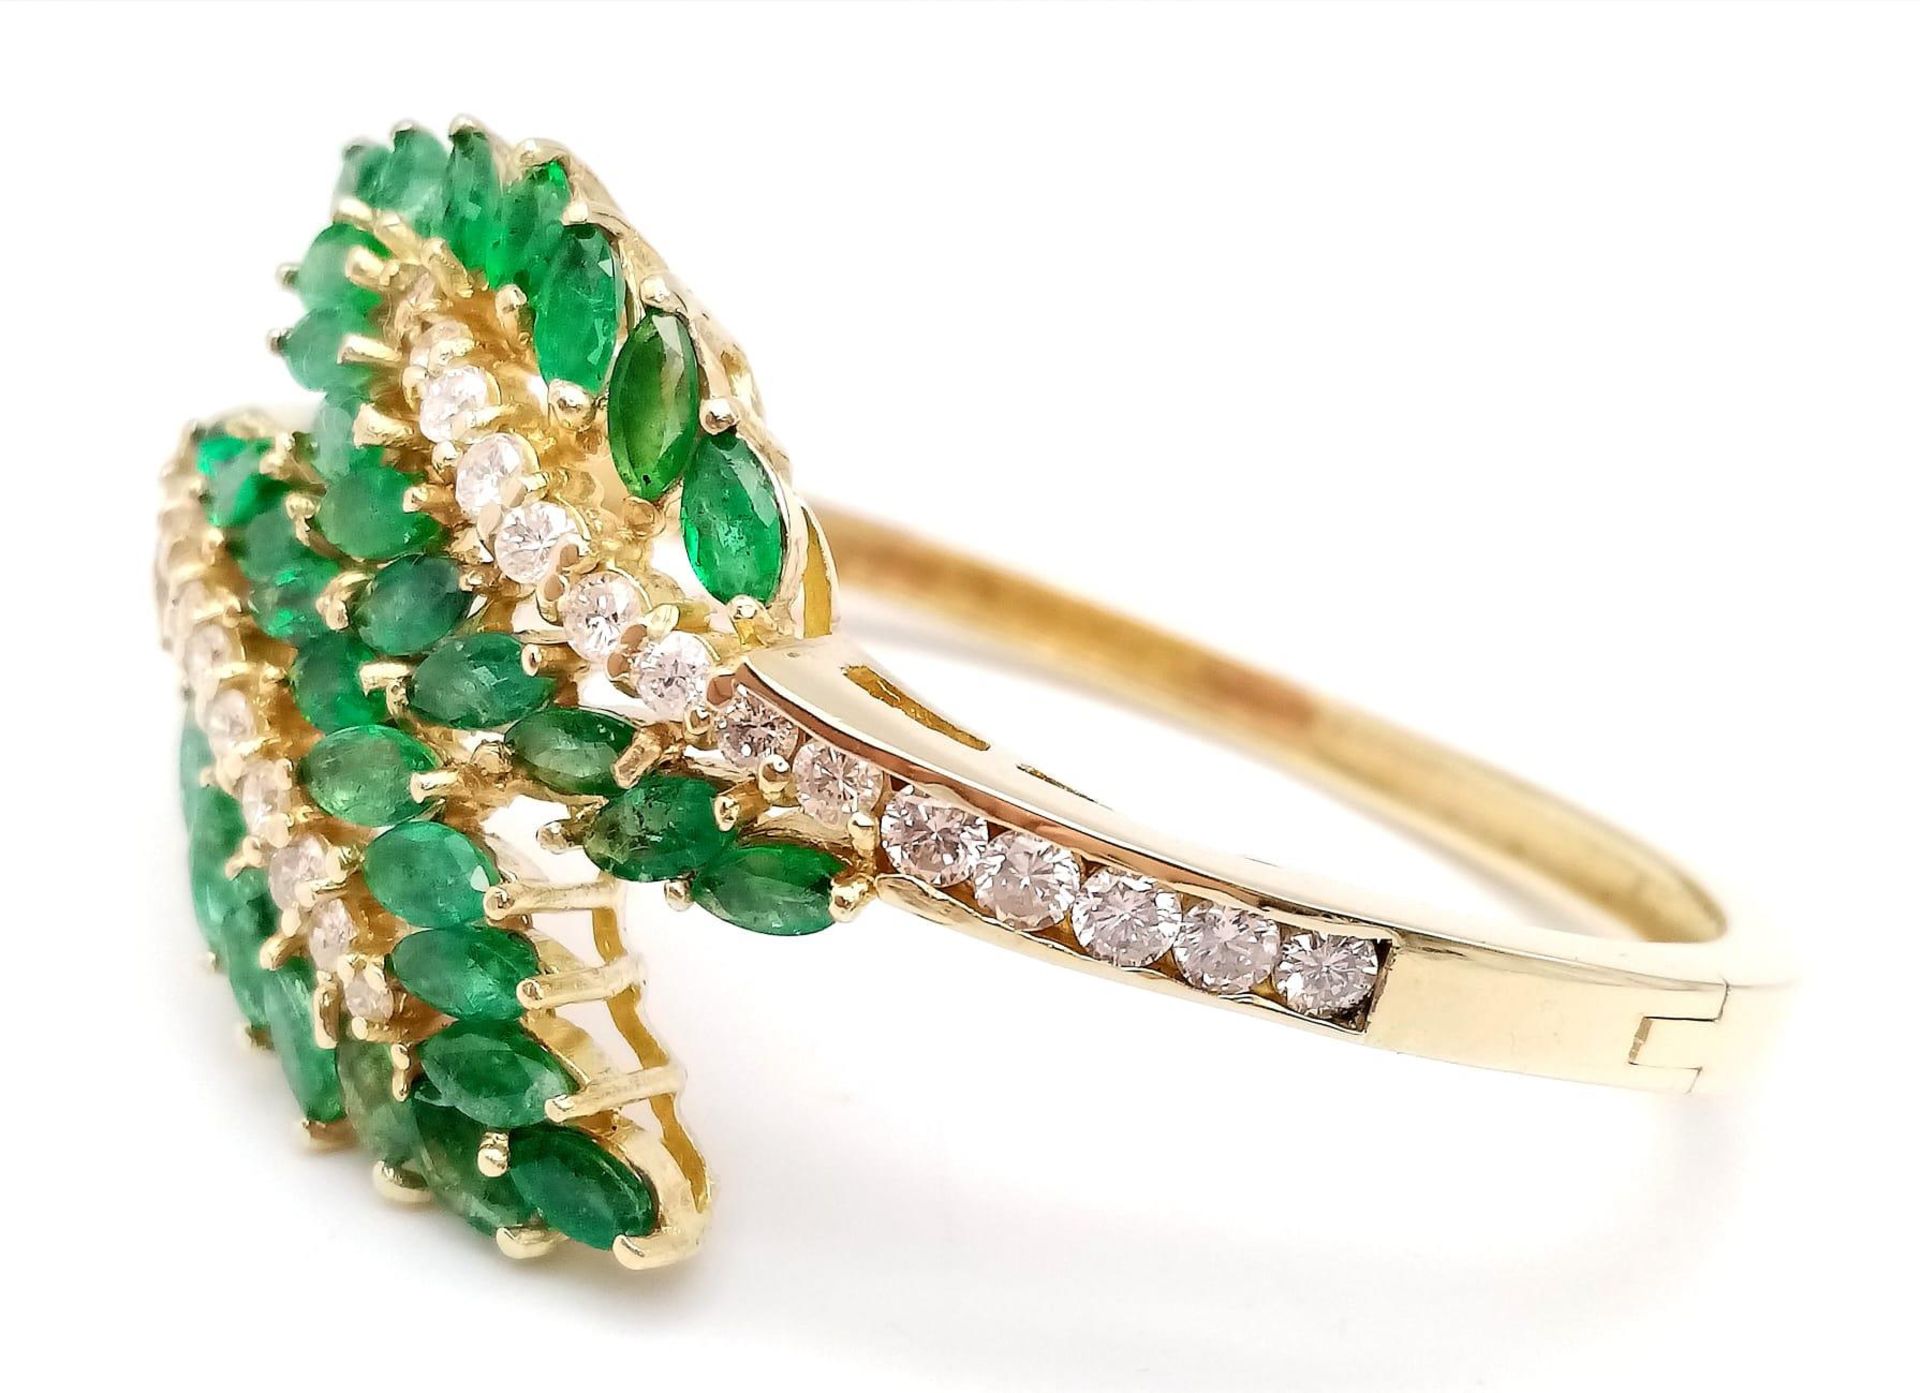 A DIAMOND AND EMERALD LEAF DESIGN BANGLE IN CROSSOVER STYLE SET IN18K GOLD . 33.5gms 10457 - Bild 5 aus 15